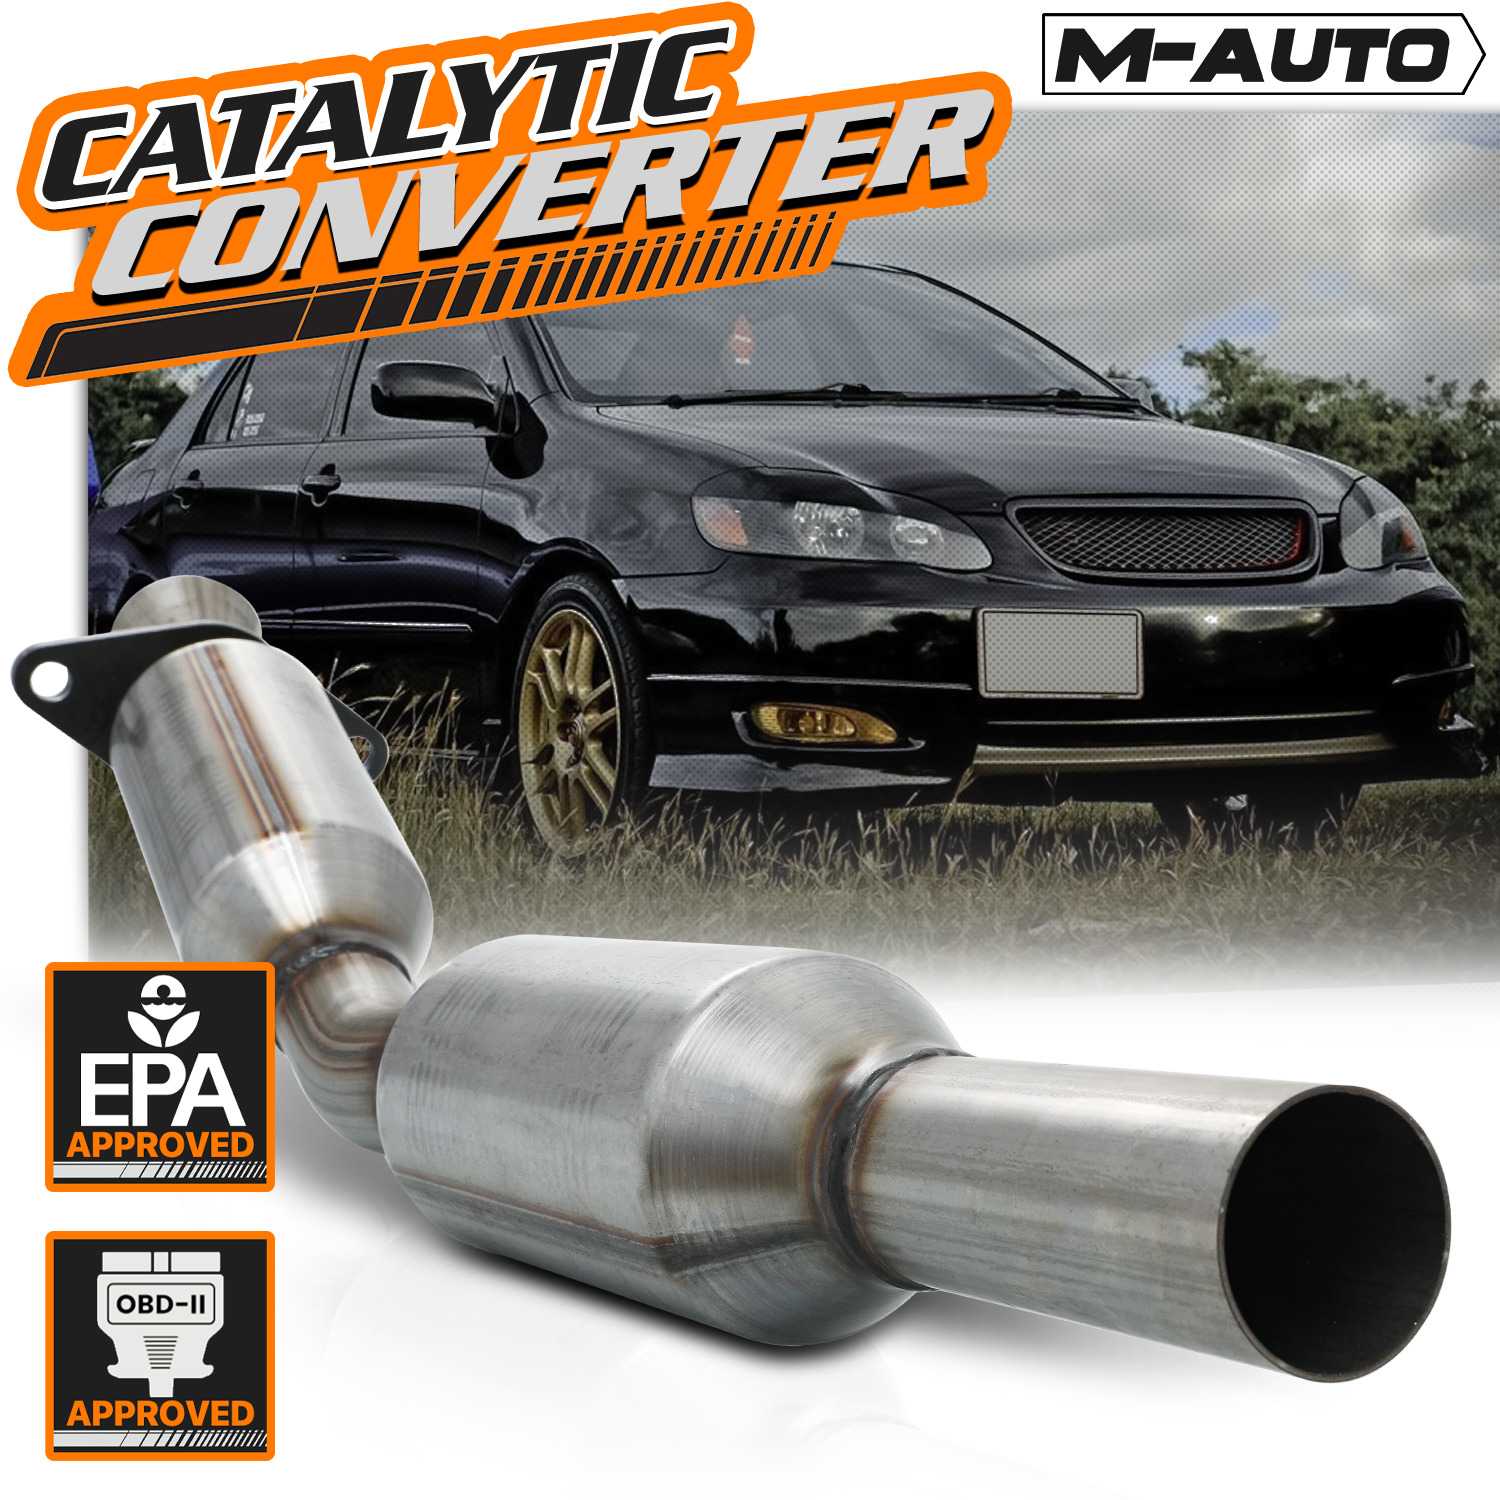 Catalytic Converter Exhaust Down Pipe For 2001-2006 Vibe/Corolla/Matrix 1.8 I4